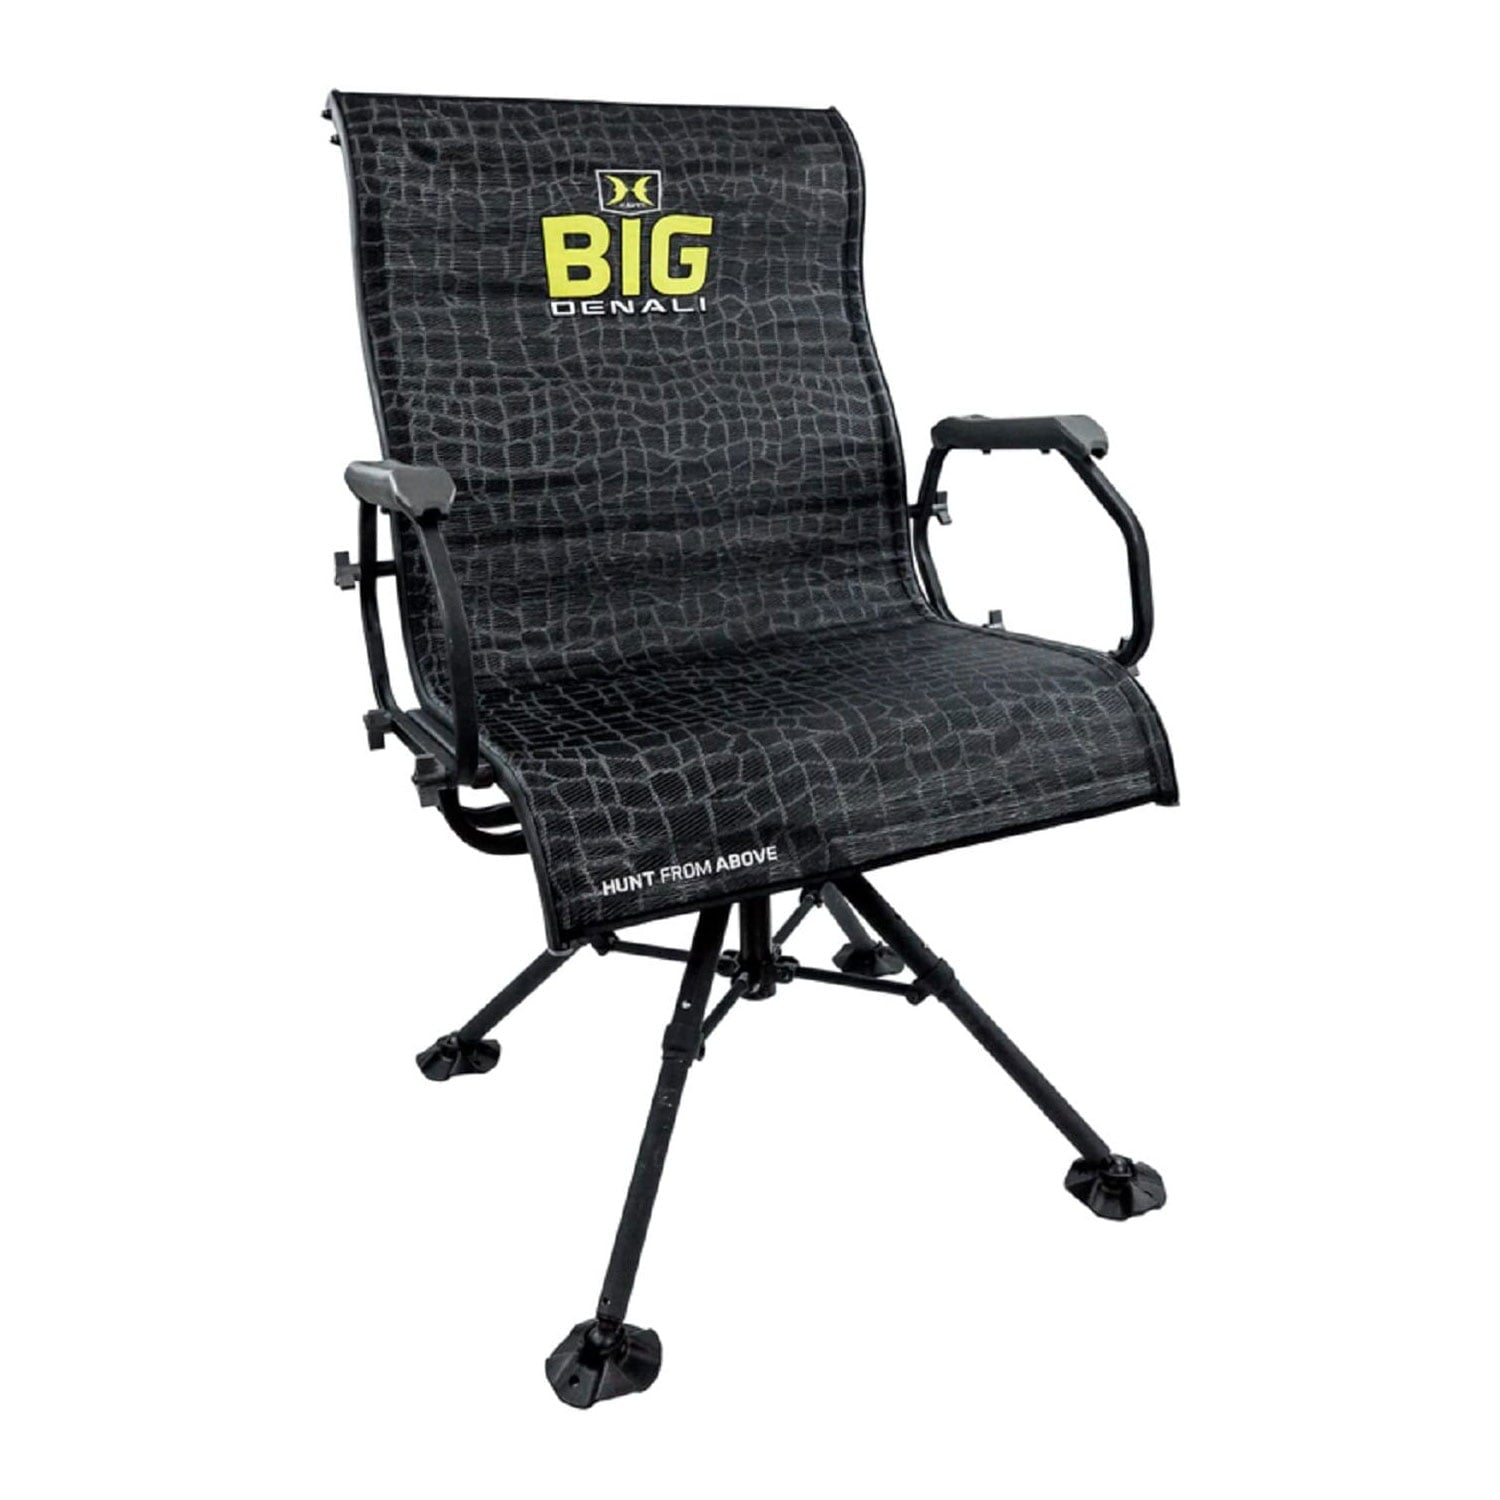 HAWK Big Denali Luxury Blind Chair for Camping, Hunting, and Fishing